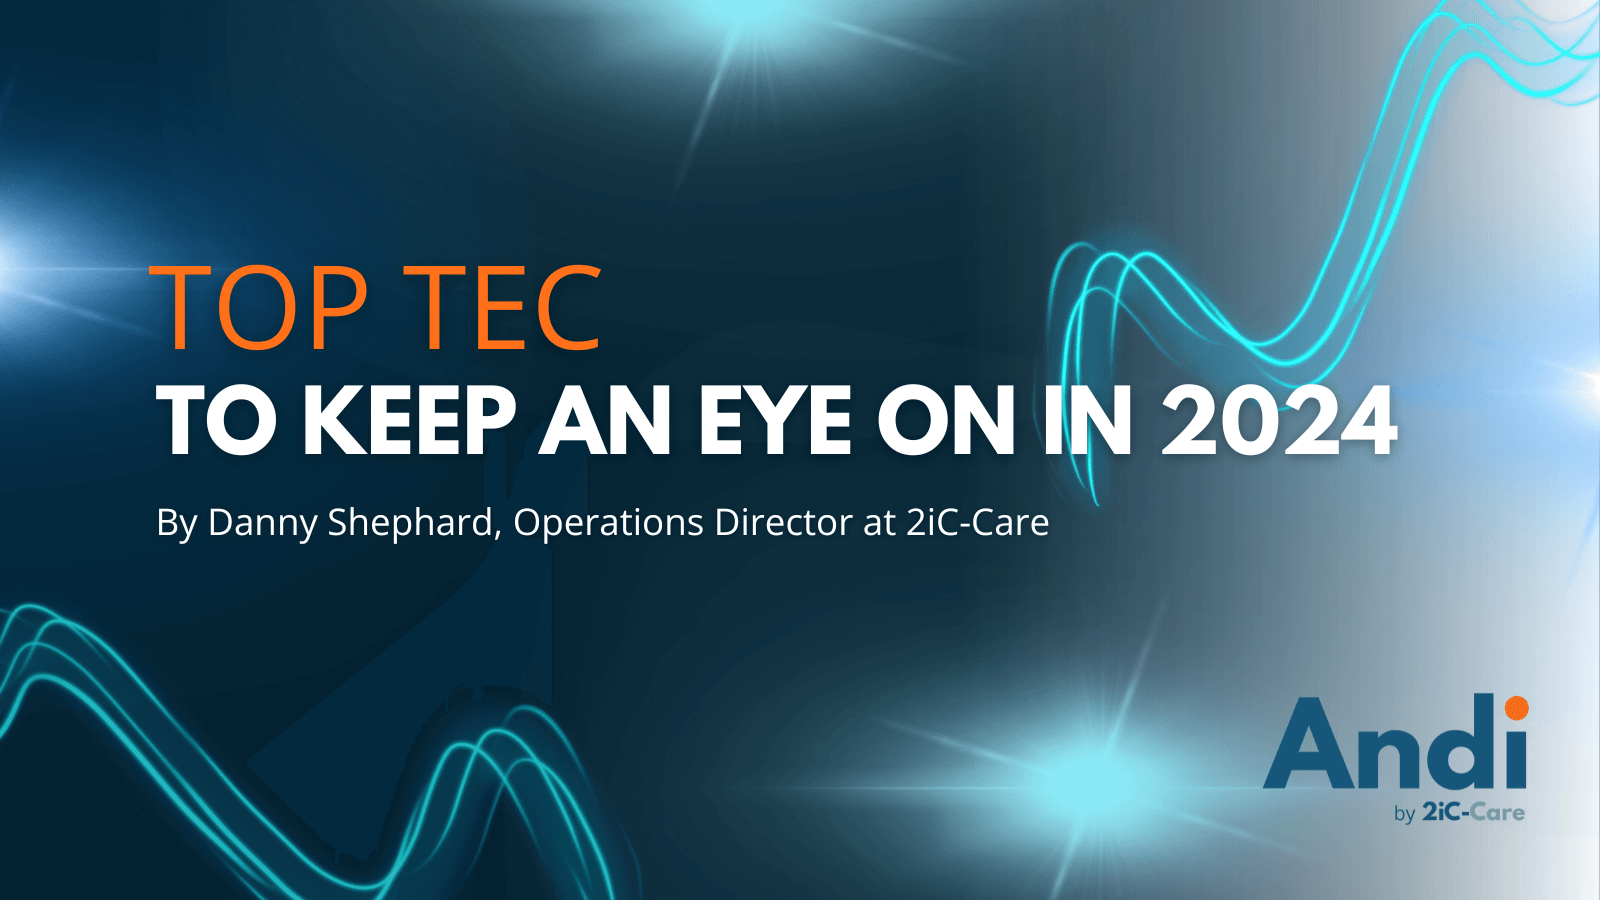 Top TEC to Keep an Eye on in 2024 